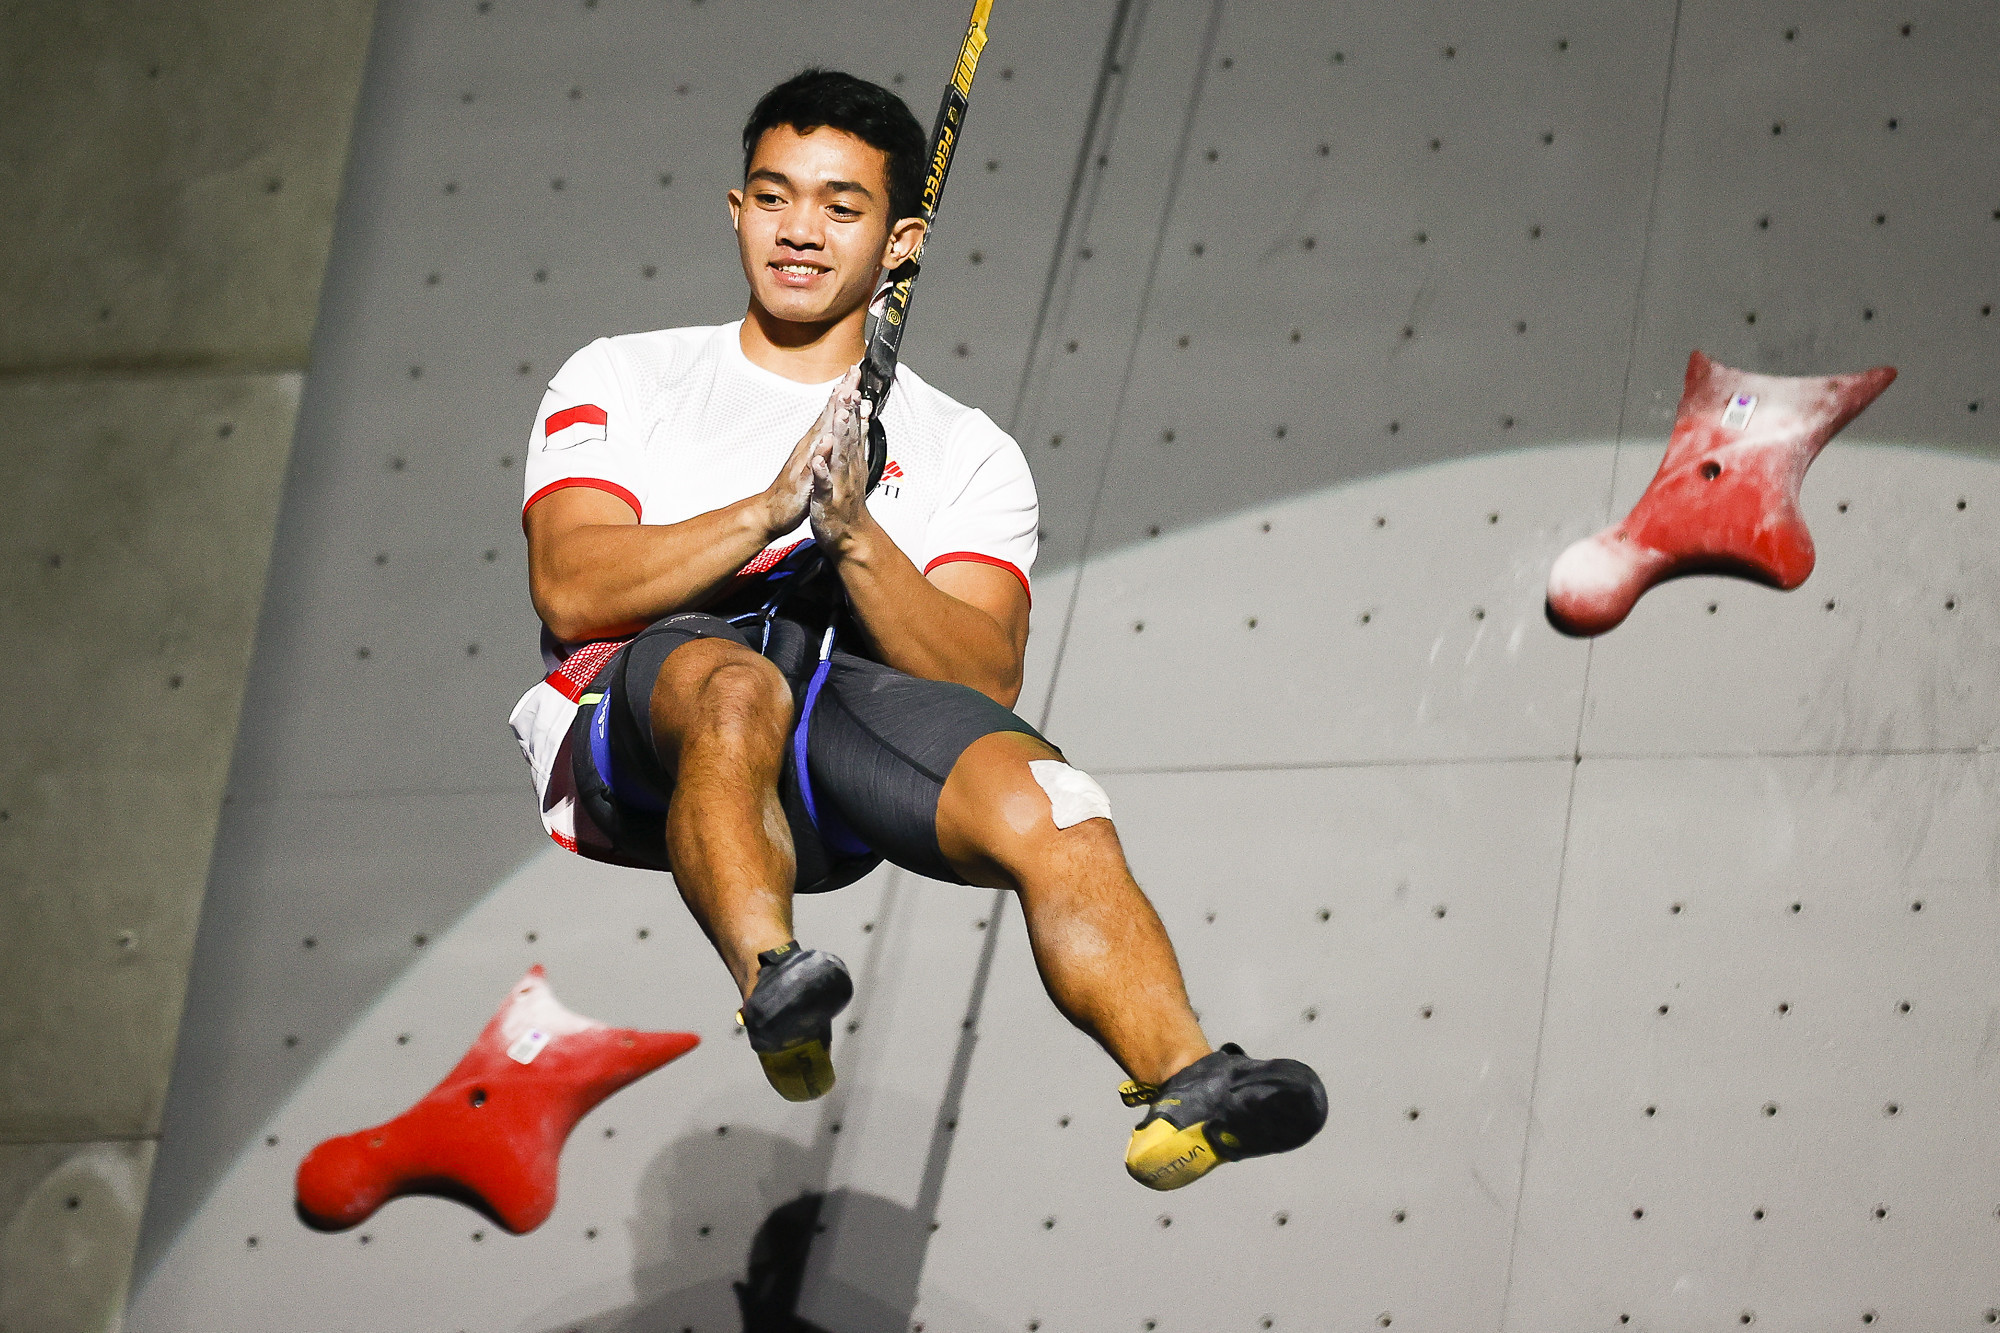 Katibin and Miroslaw set speed world records at Seoul IFSC World Cup